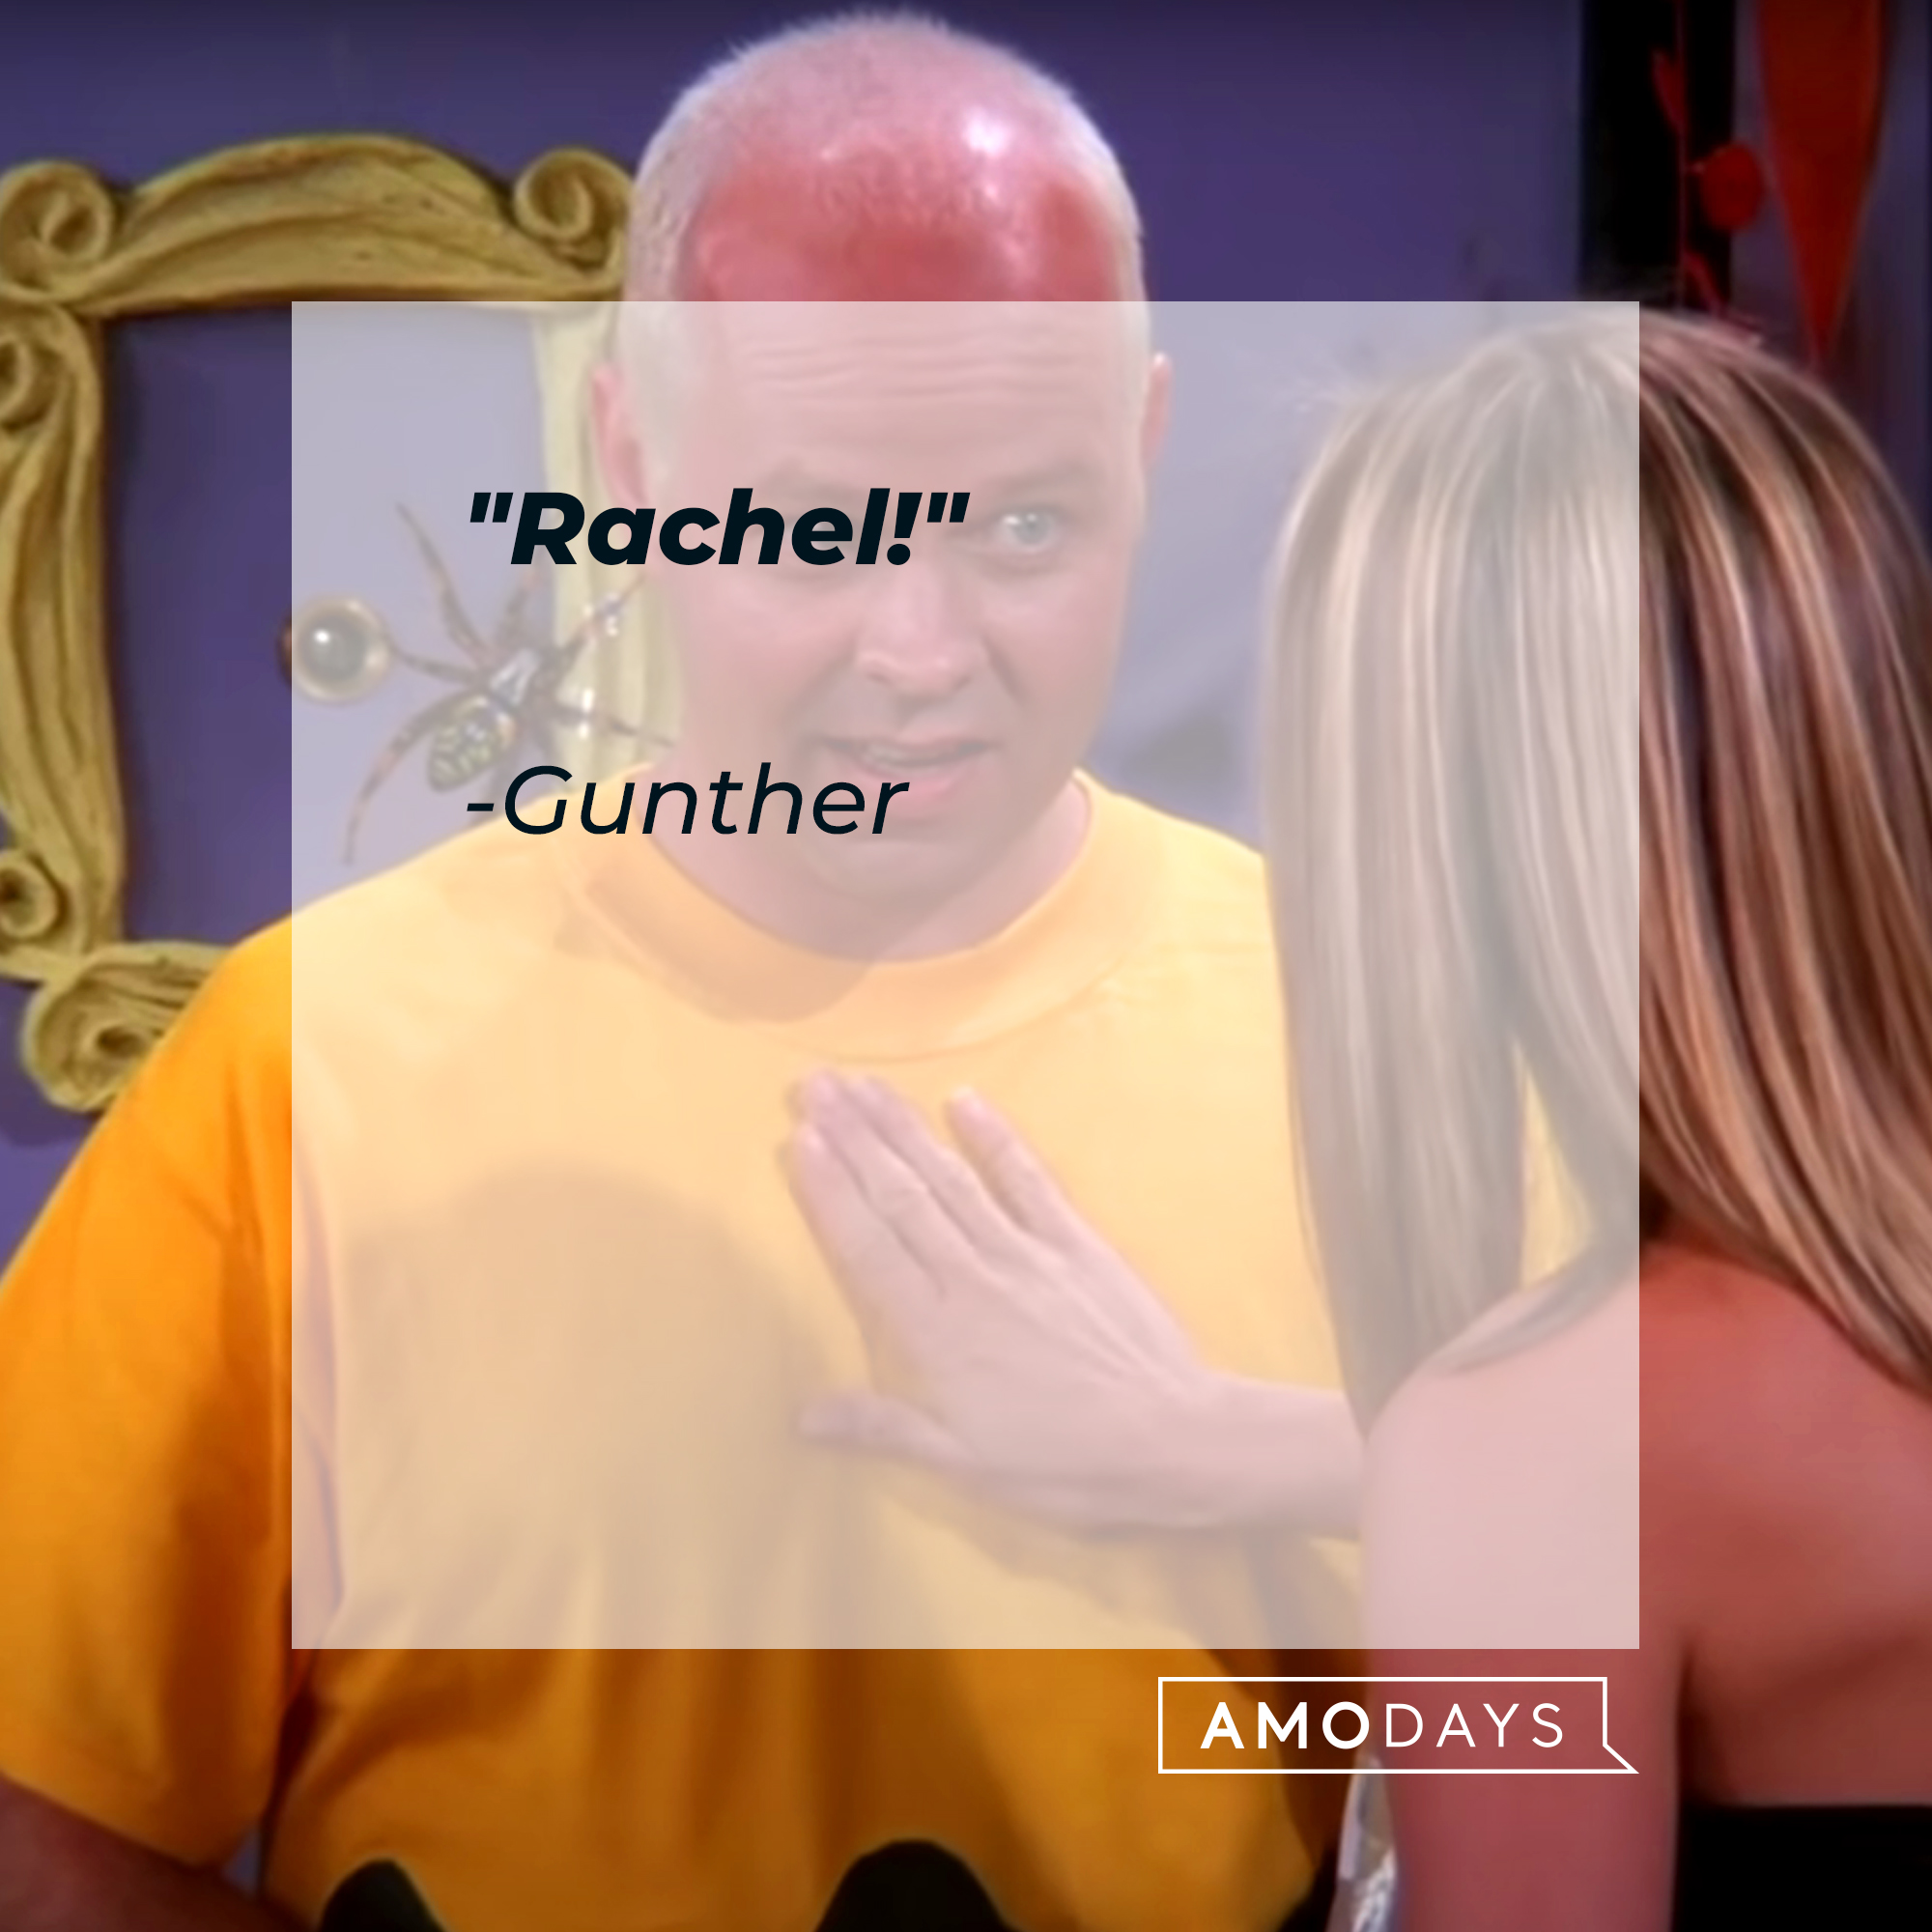 An image of Gunther and Rachel, with his quote: "Rachel!" | Source: Youtube.com/Friends